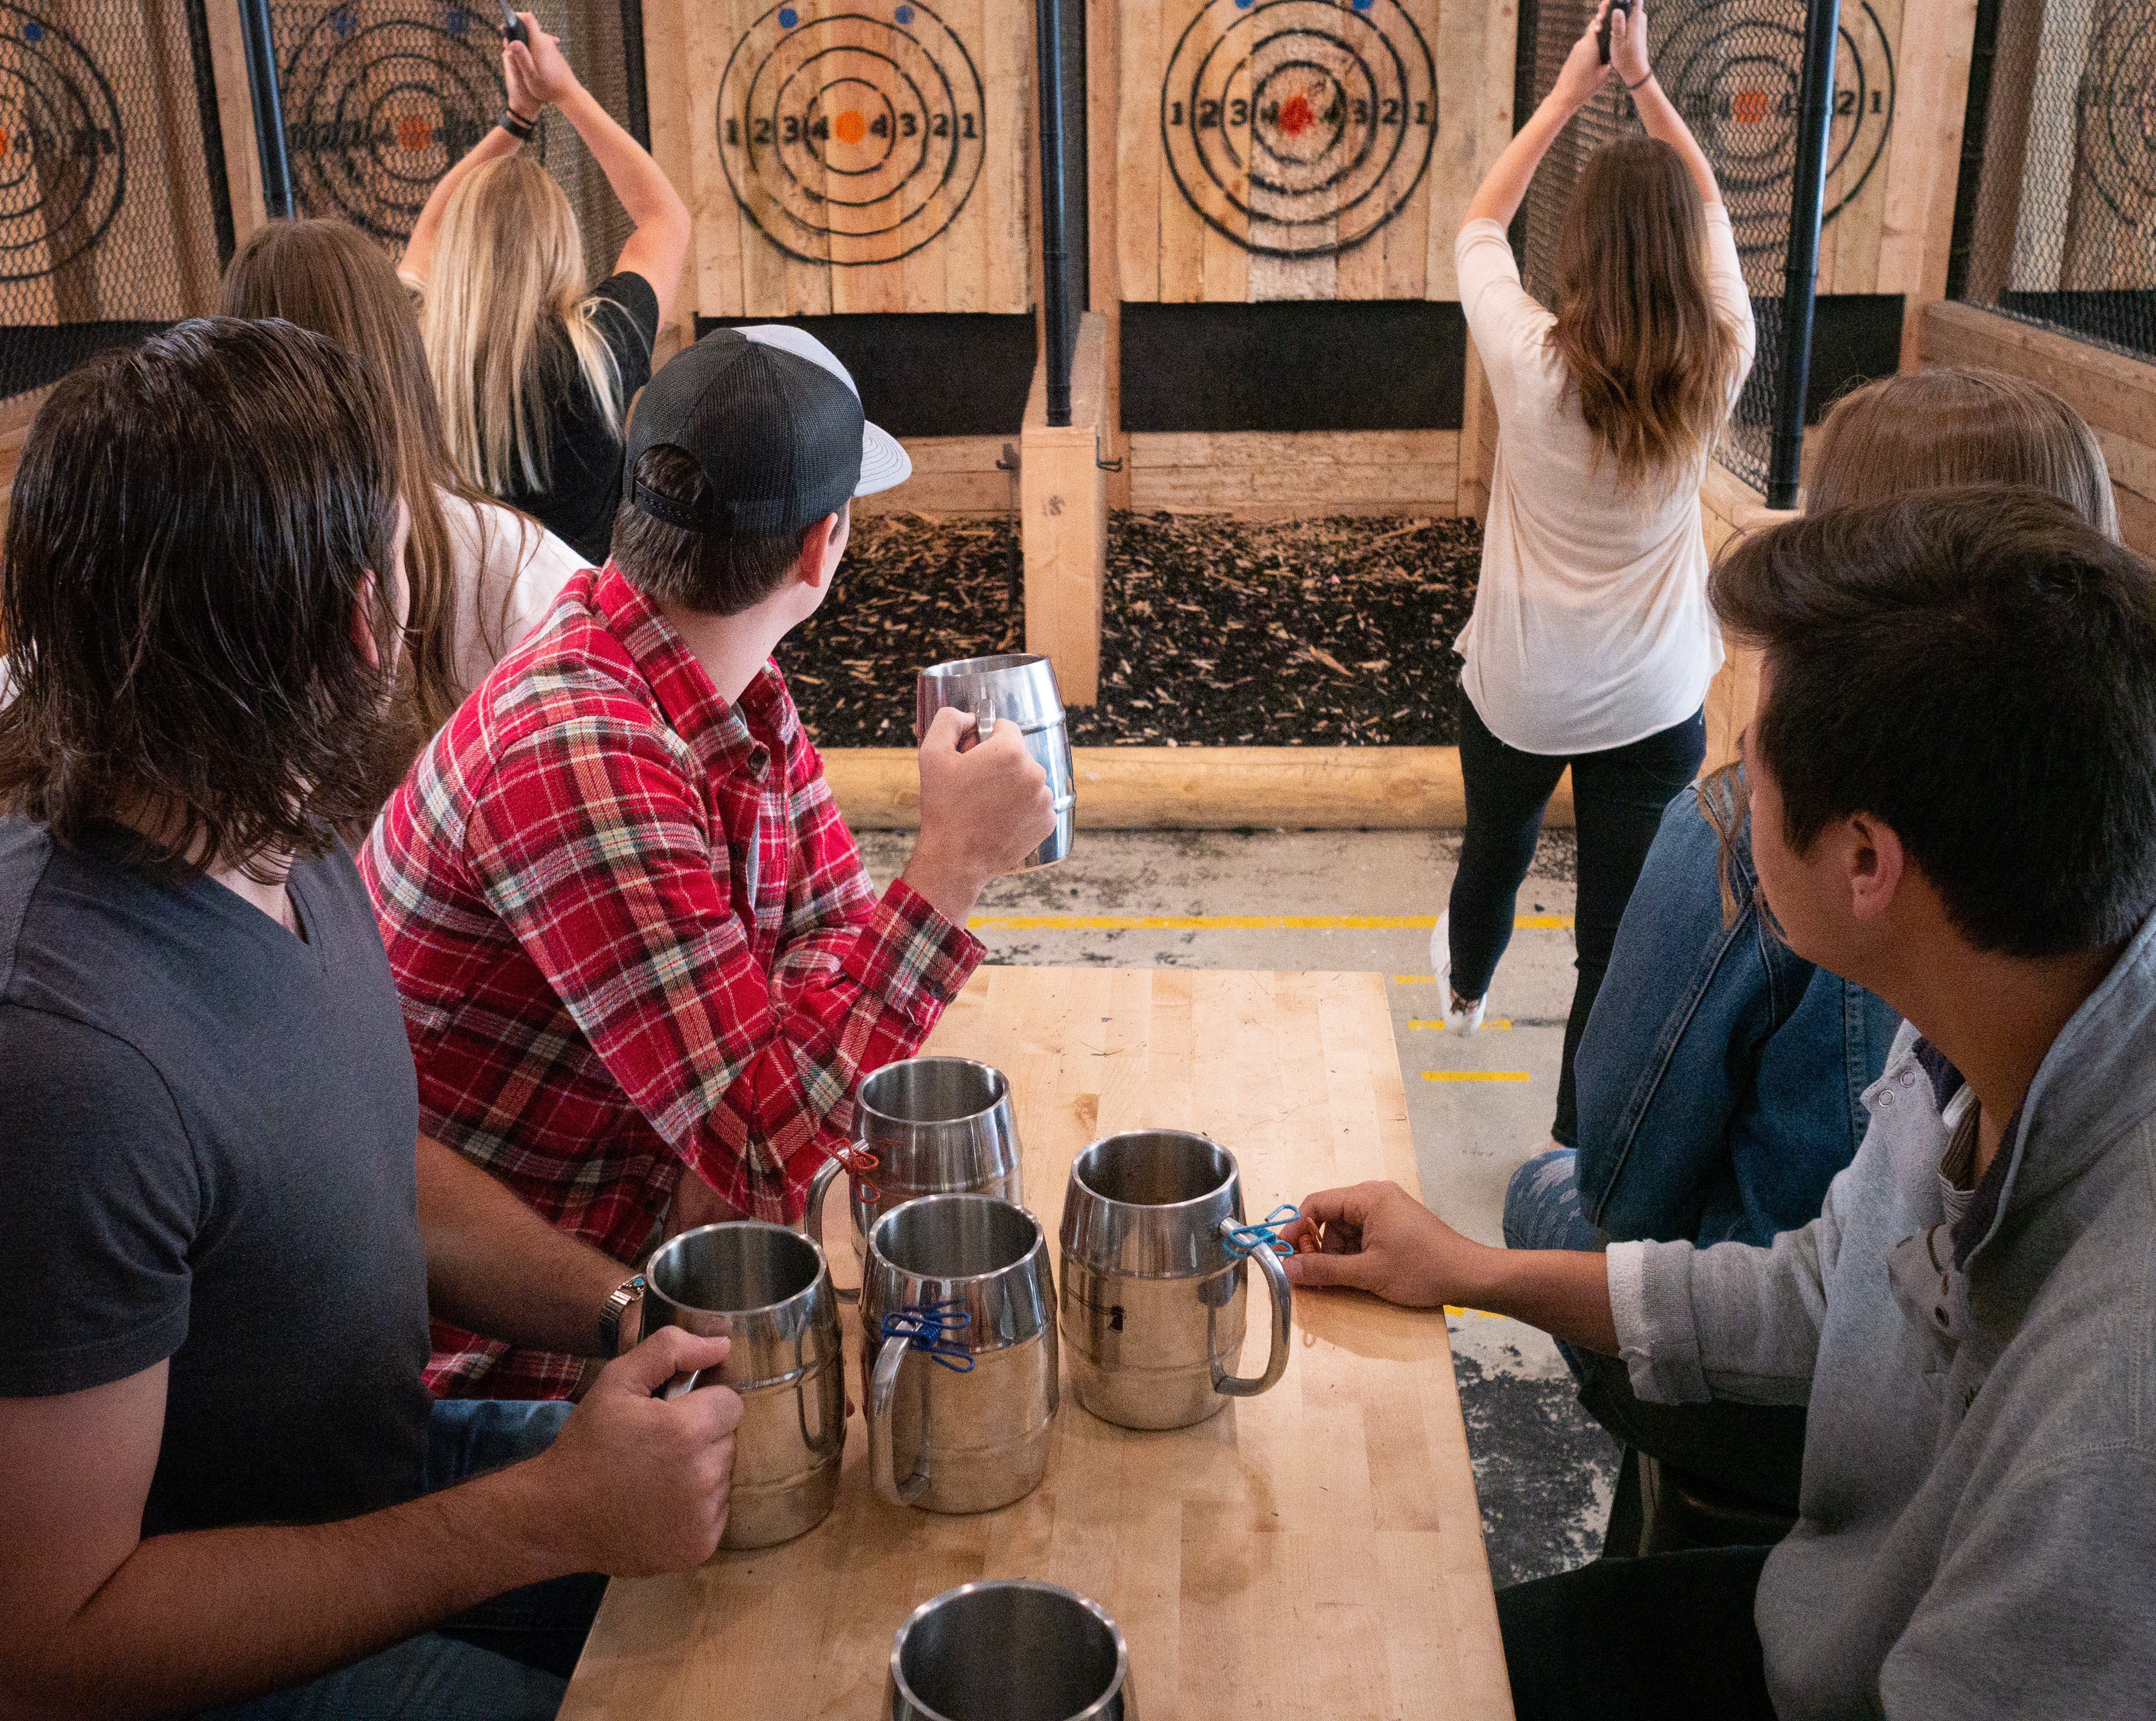 Two women throwing axes while their group watches